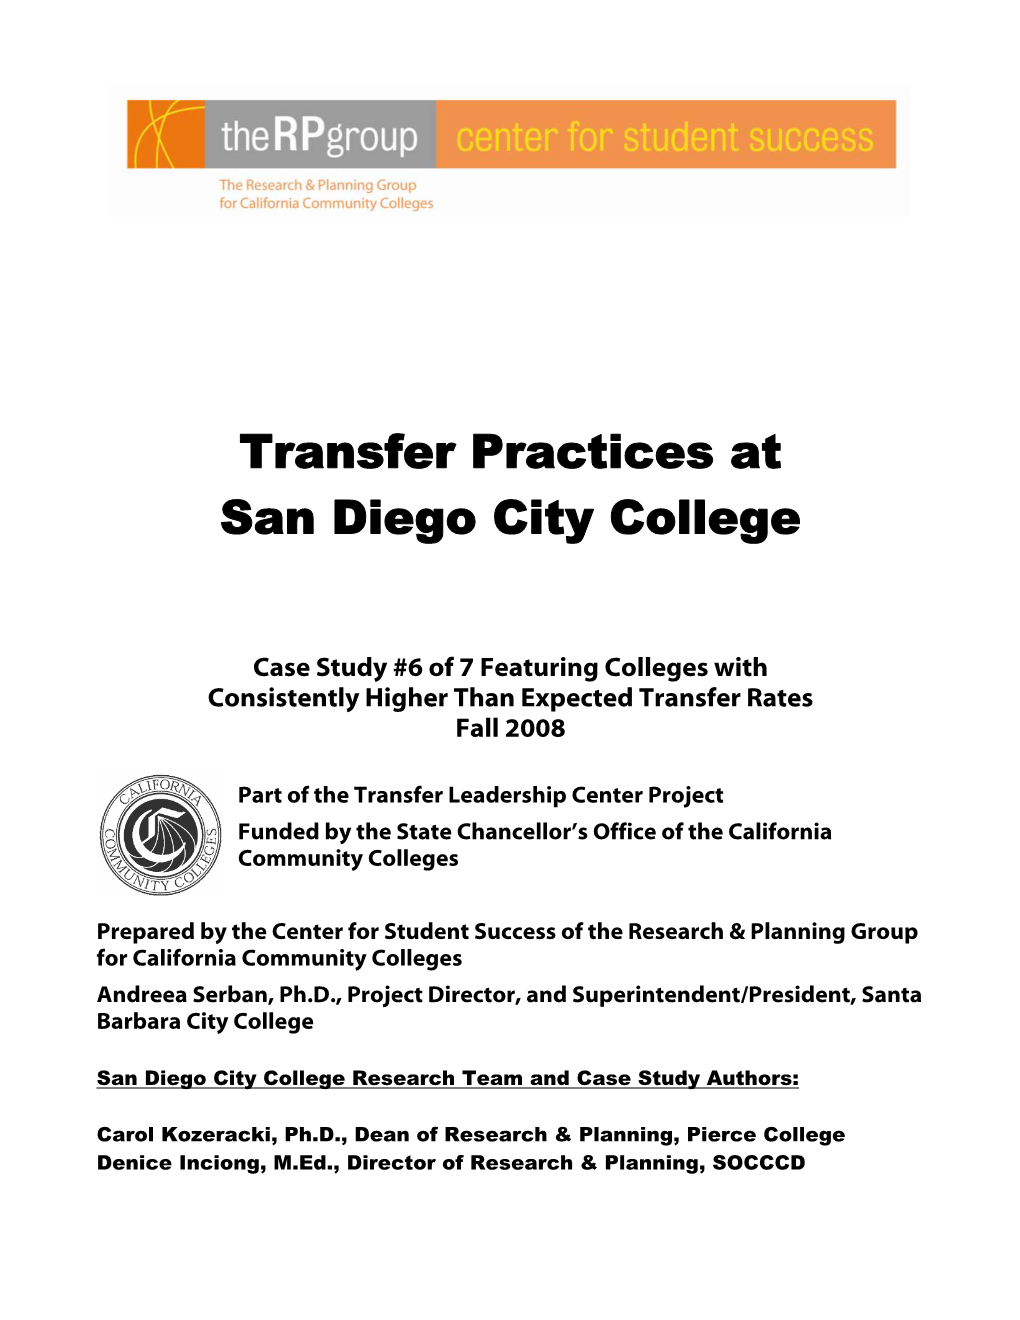 Transfer Practices at San Diego City College